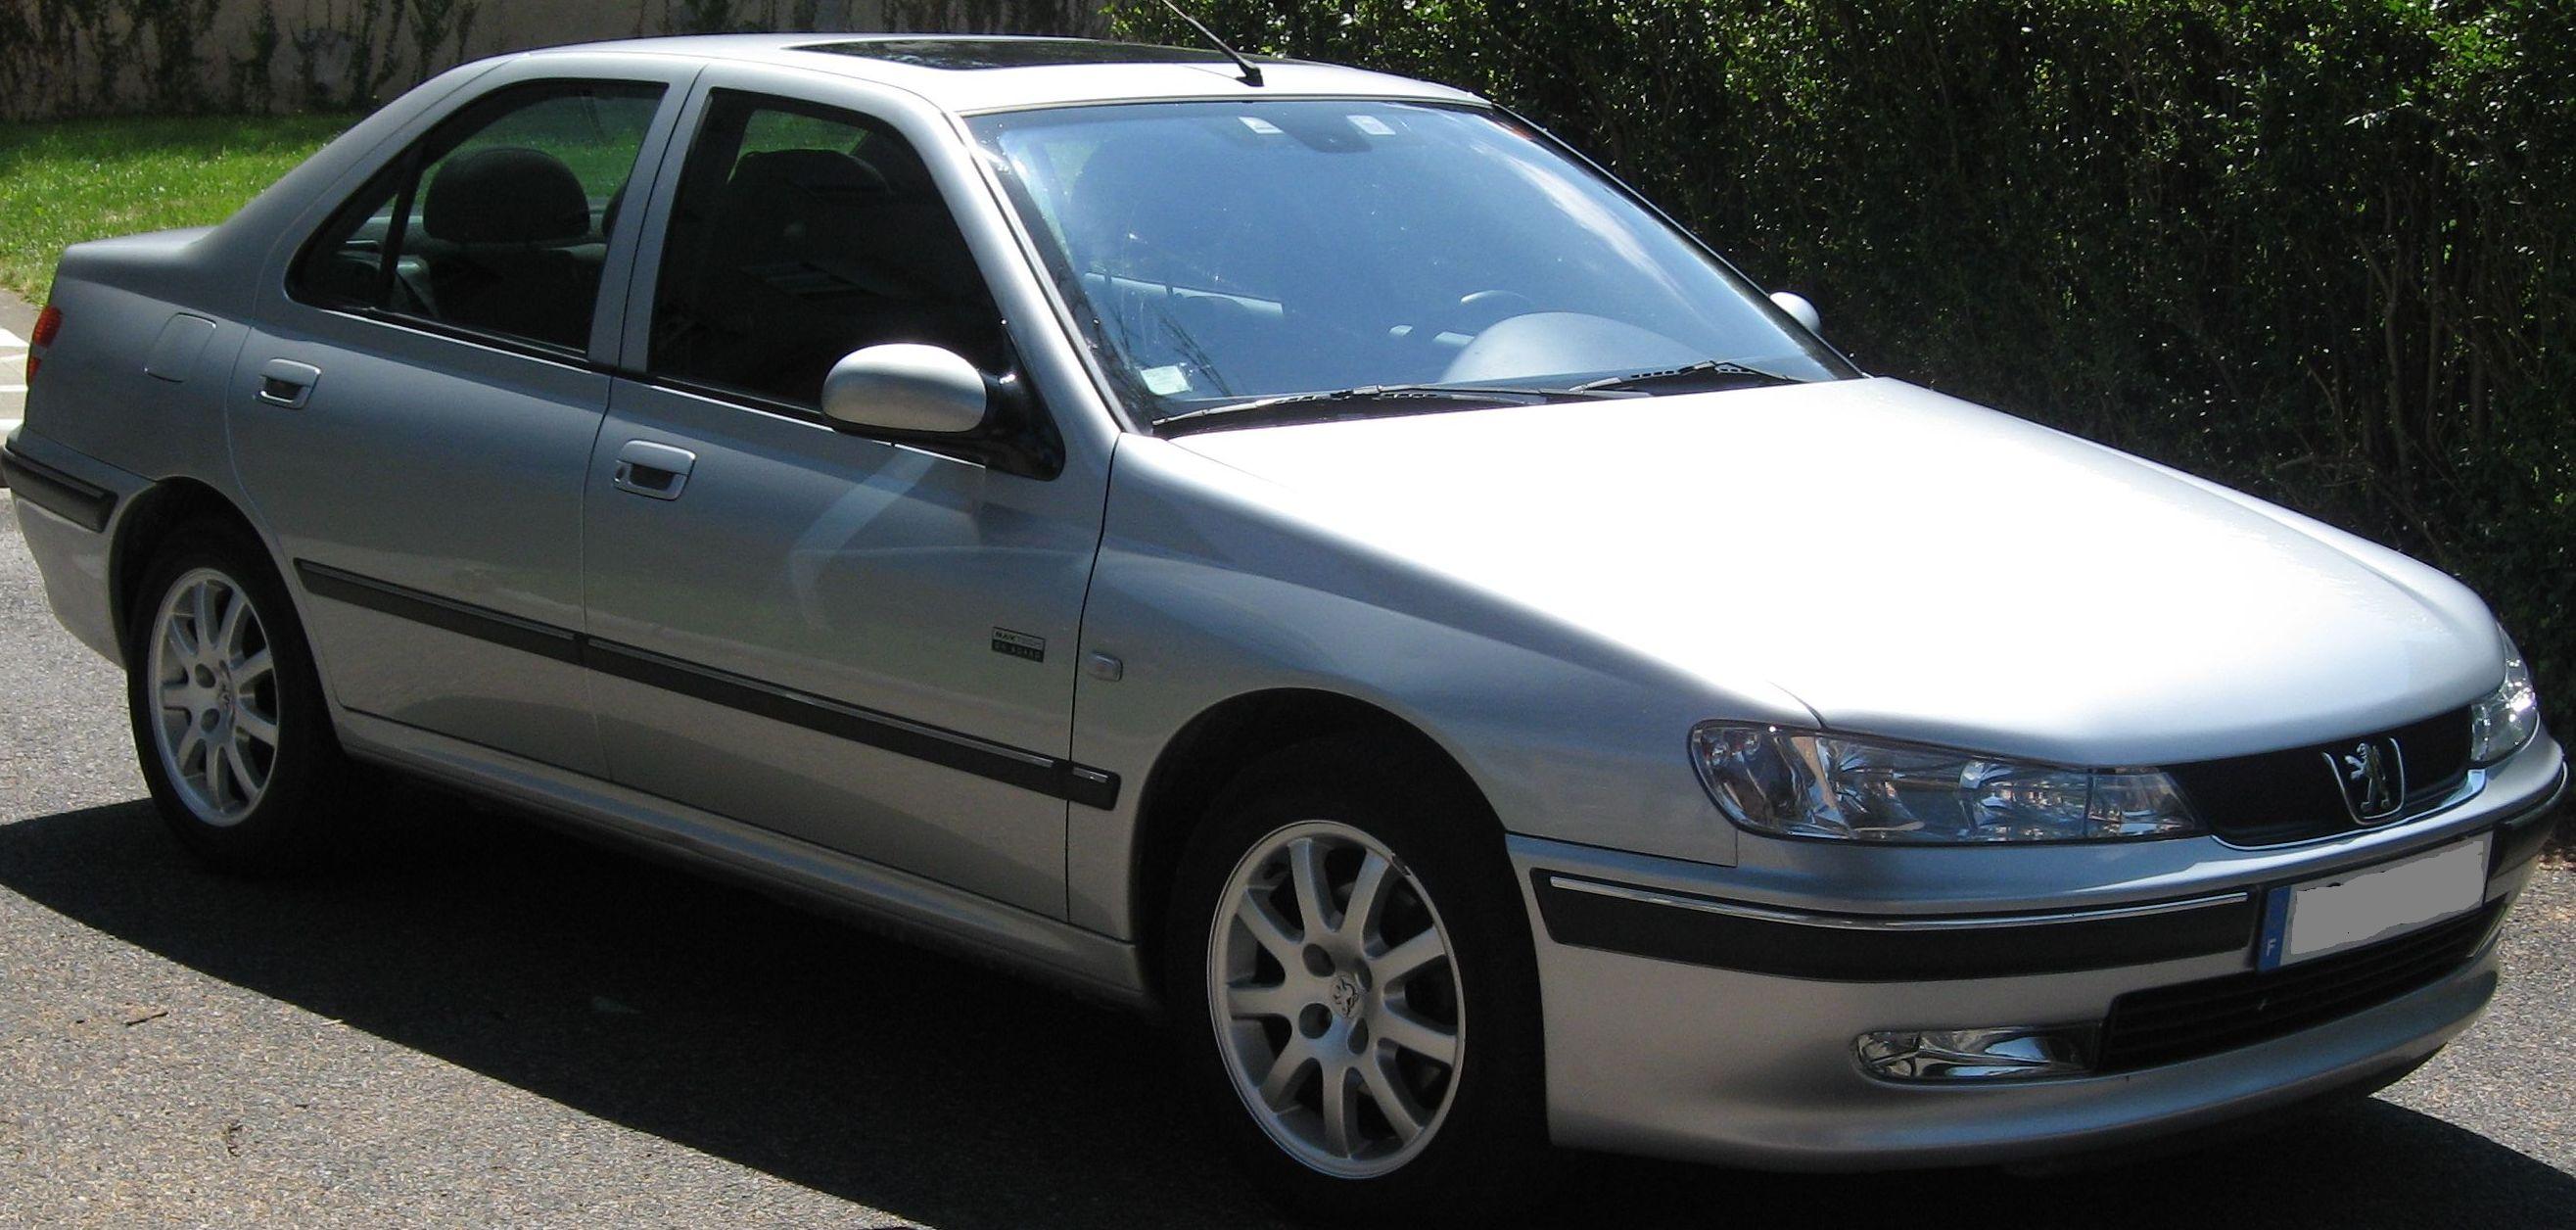 Peugeot 406 1995 - 2003 Coupe #2